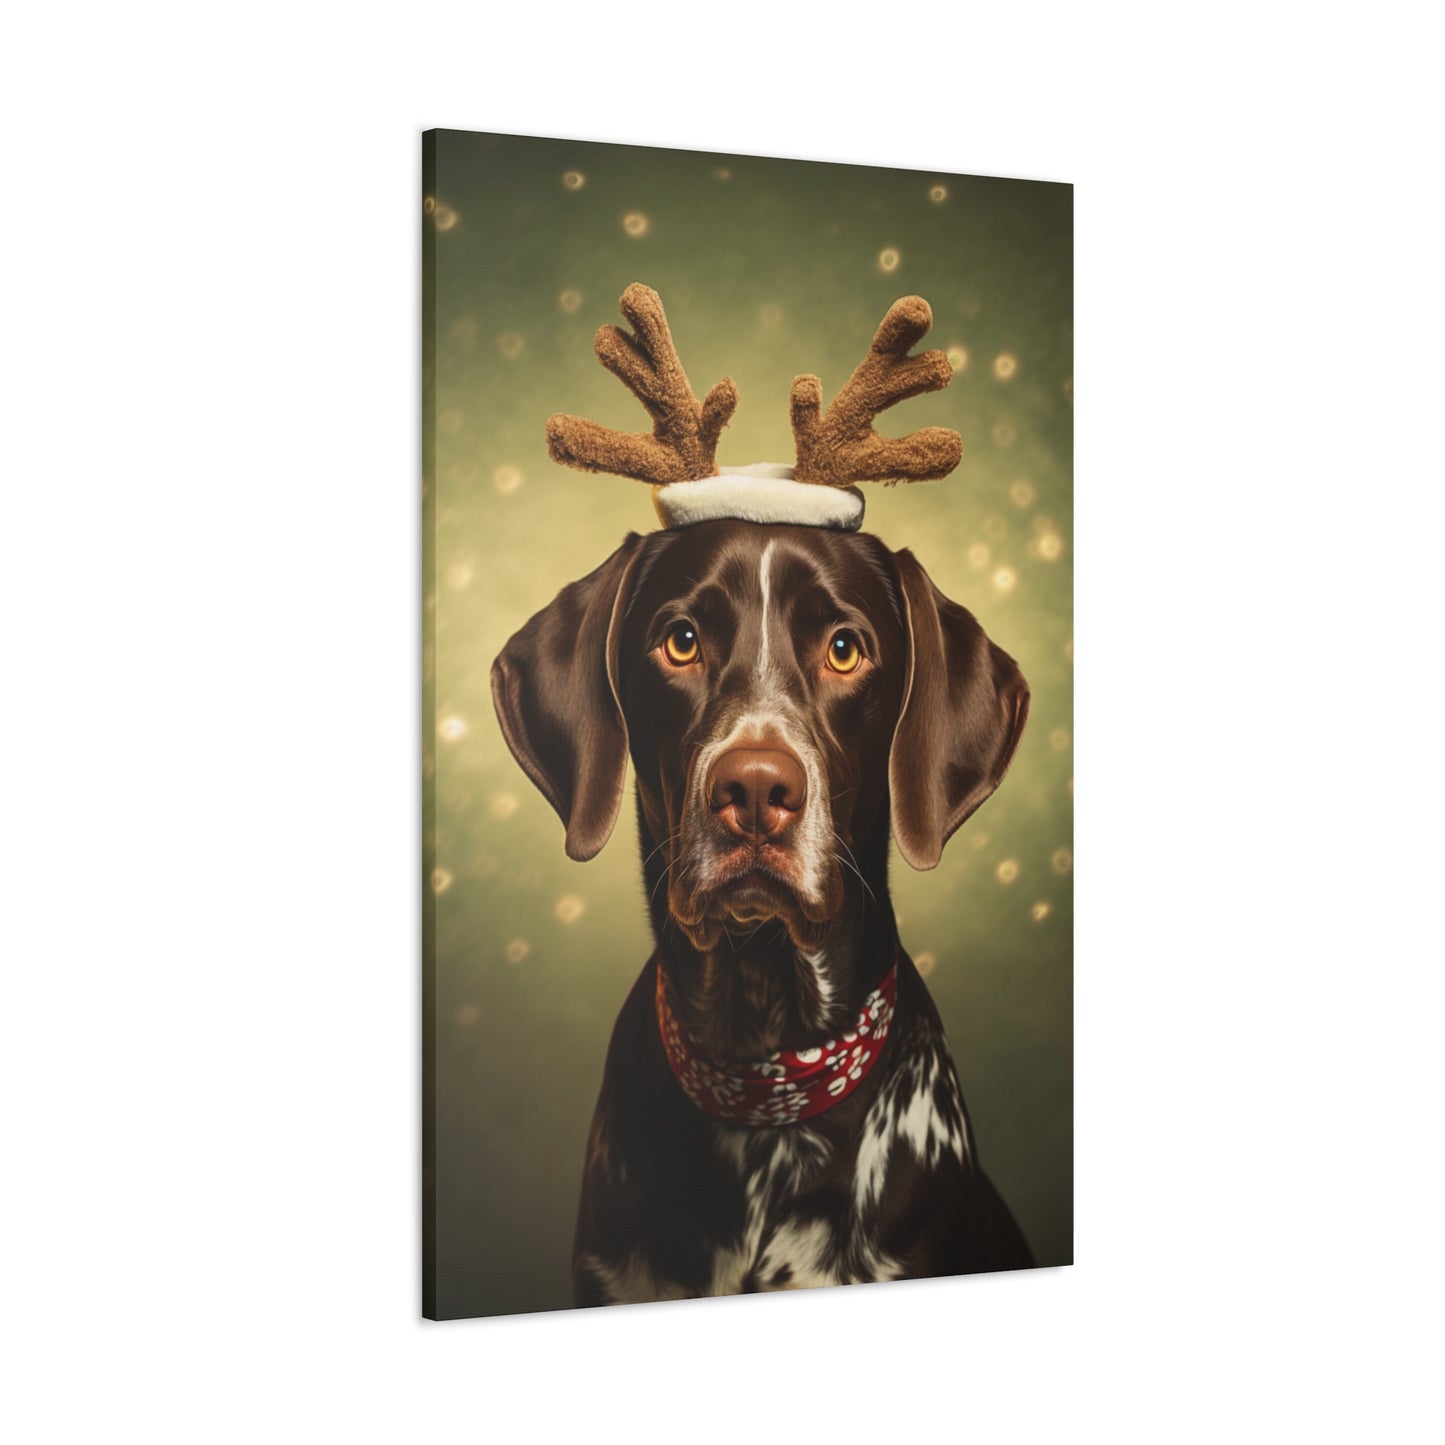 Christmas German Shorthaired Pointers with reindeer antlers decor ideas